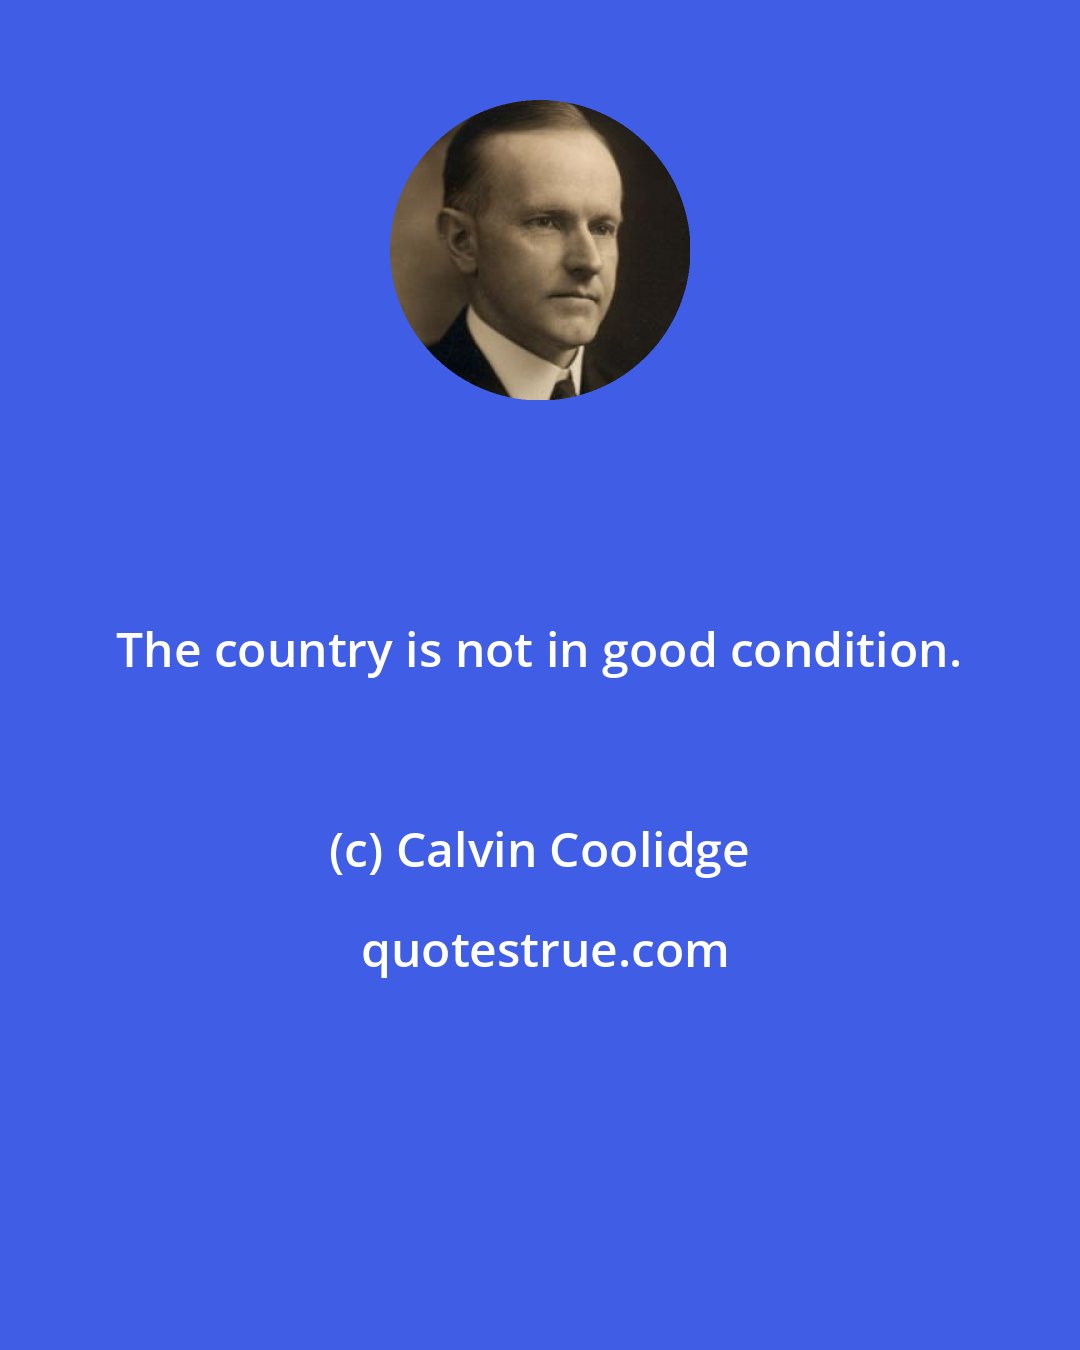 Calvin Coolidge: The country is not in good condition.